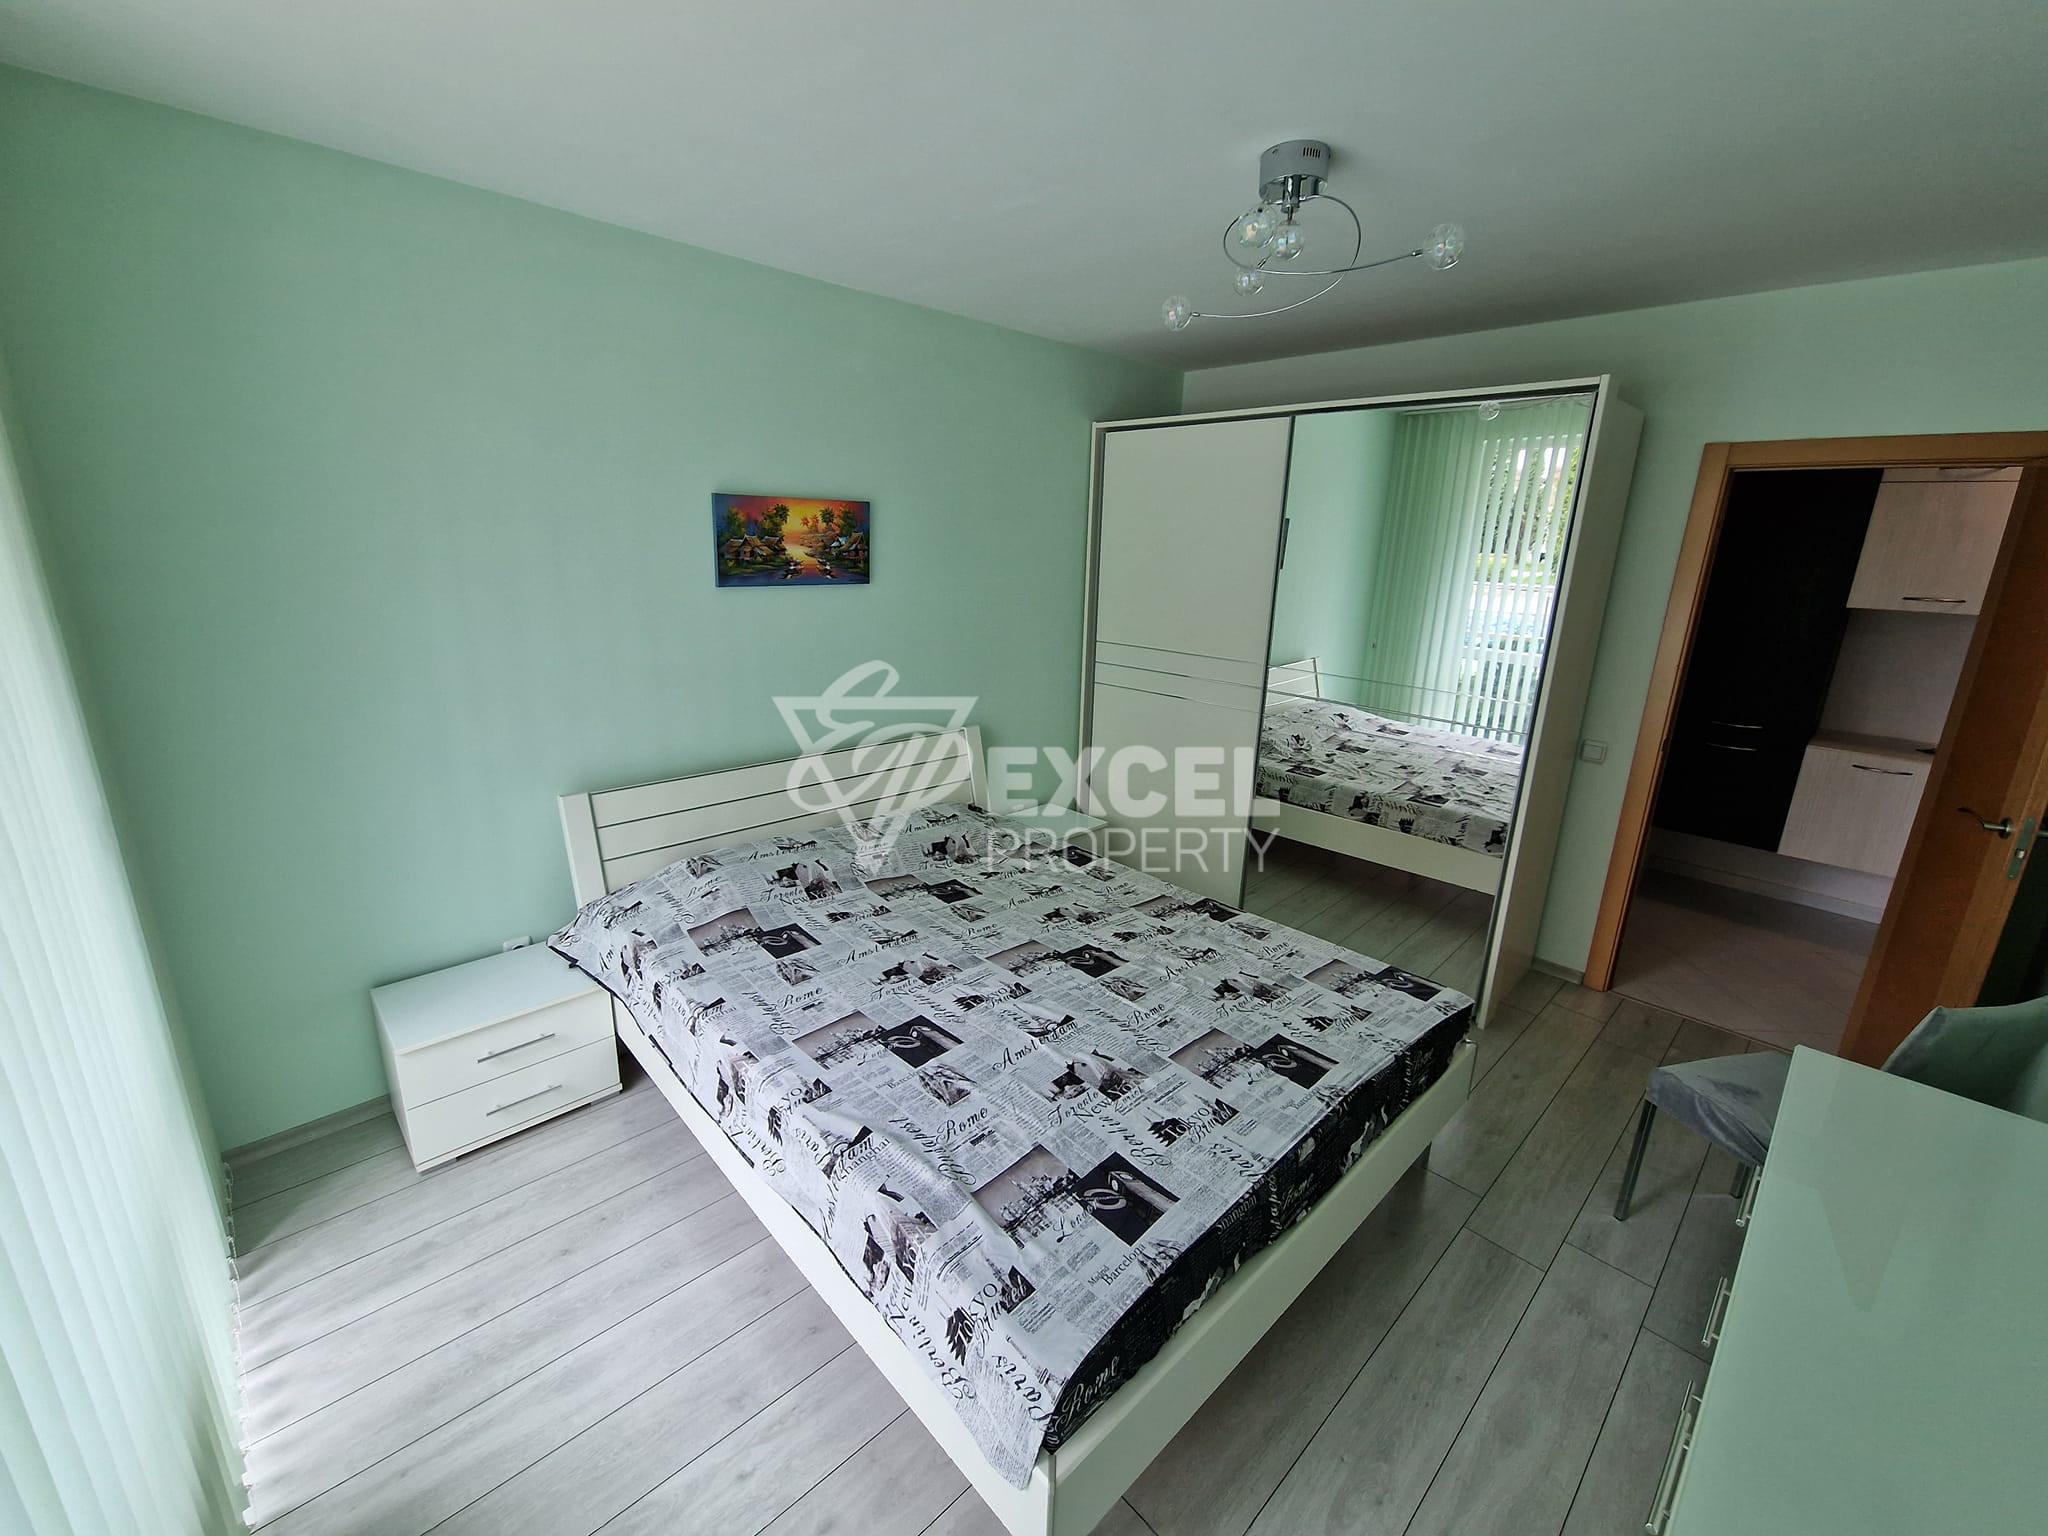 One-bedroom apartment for rent in Boyana Fantasy, Sofia